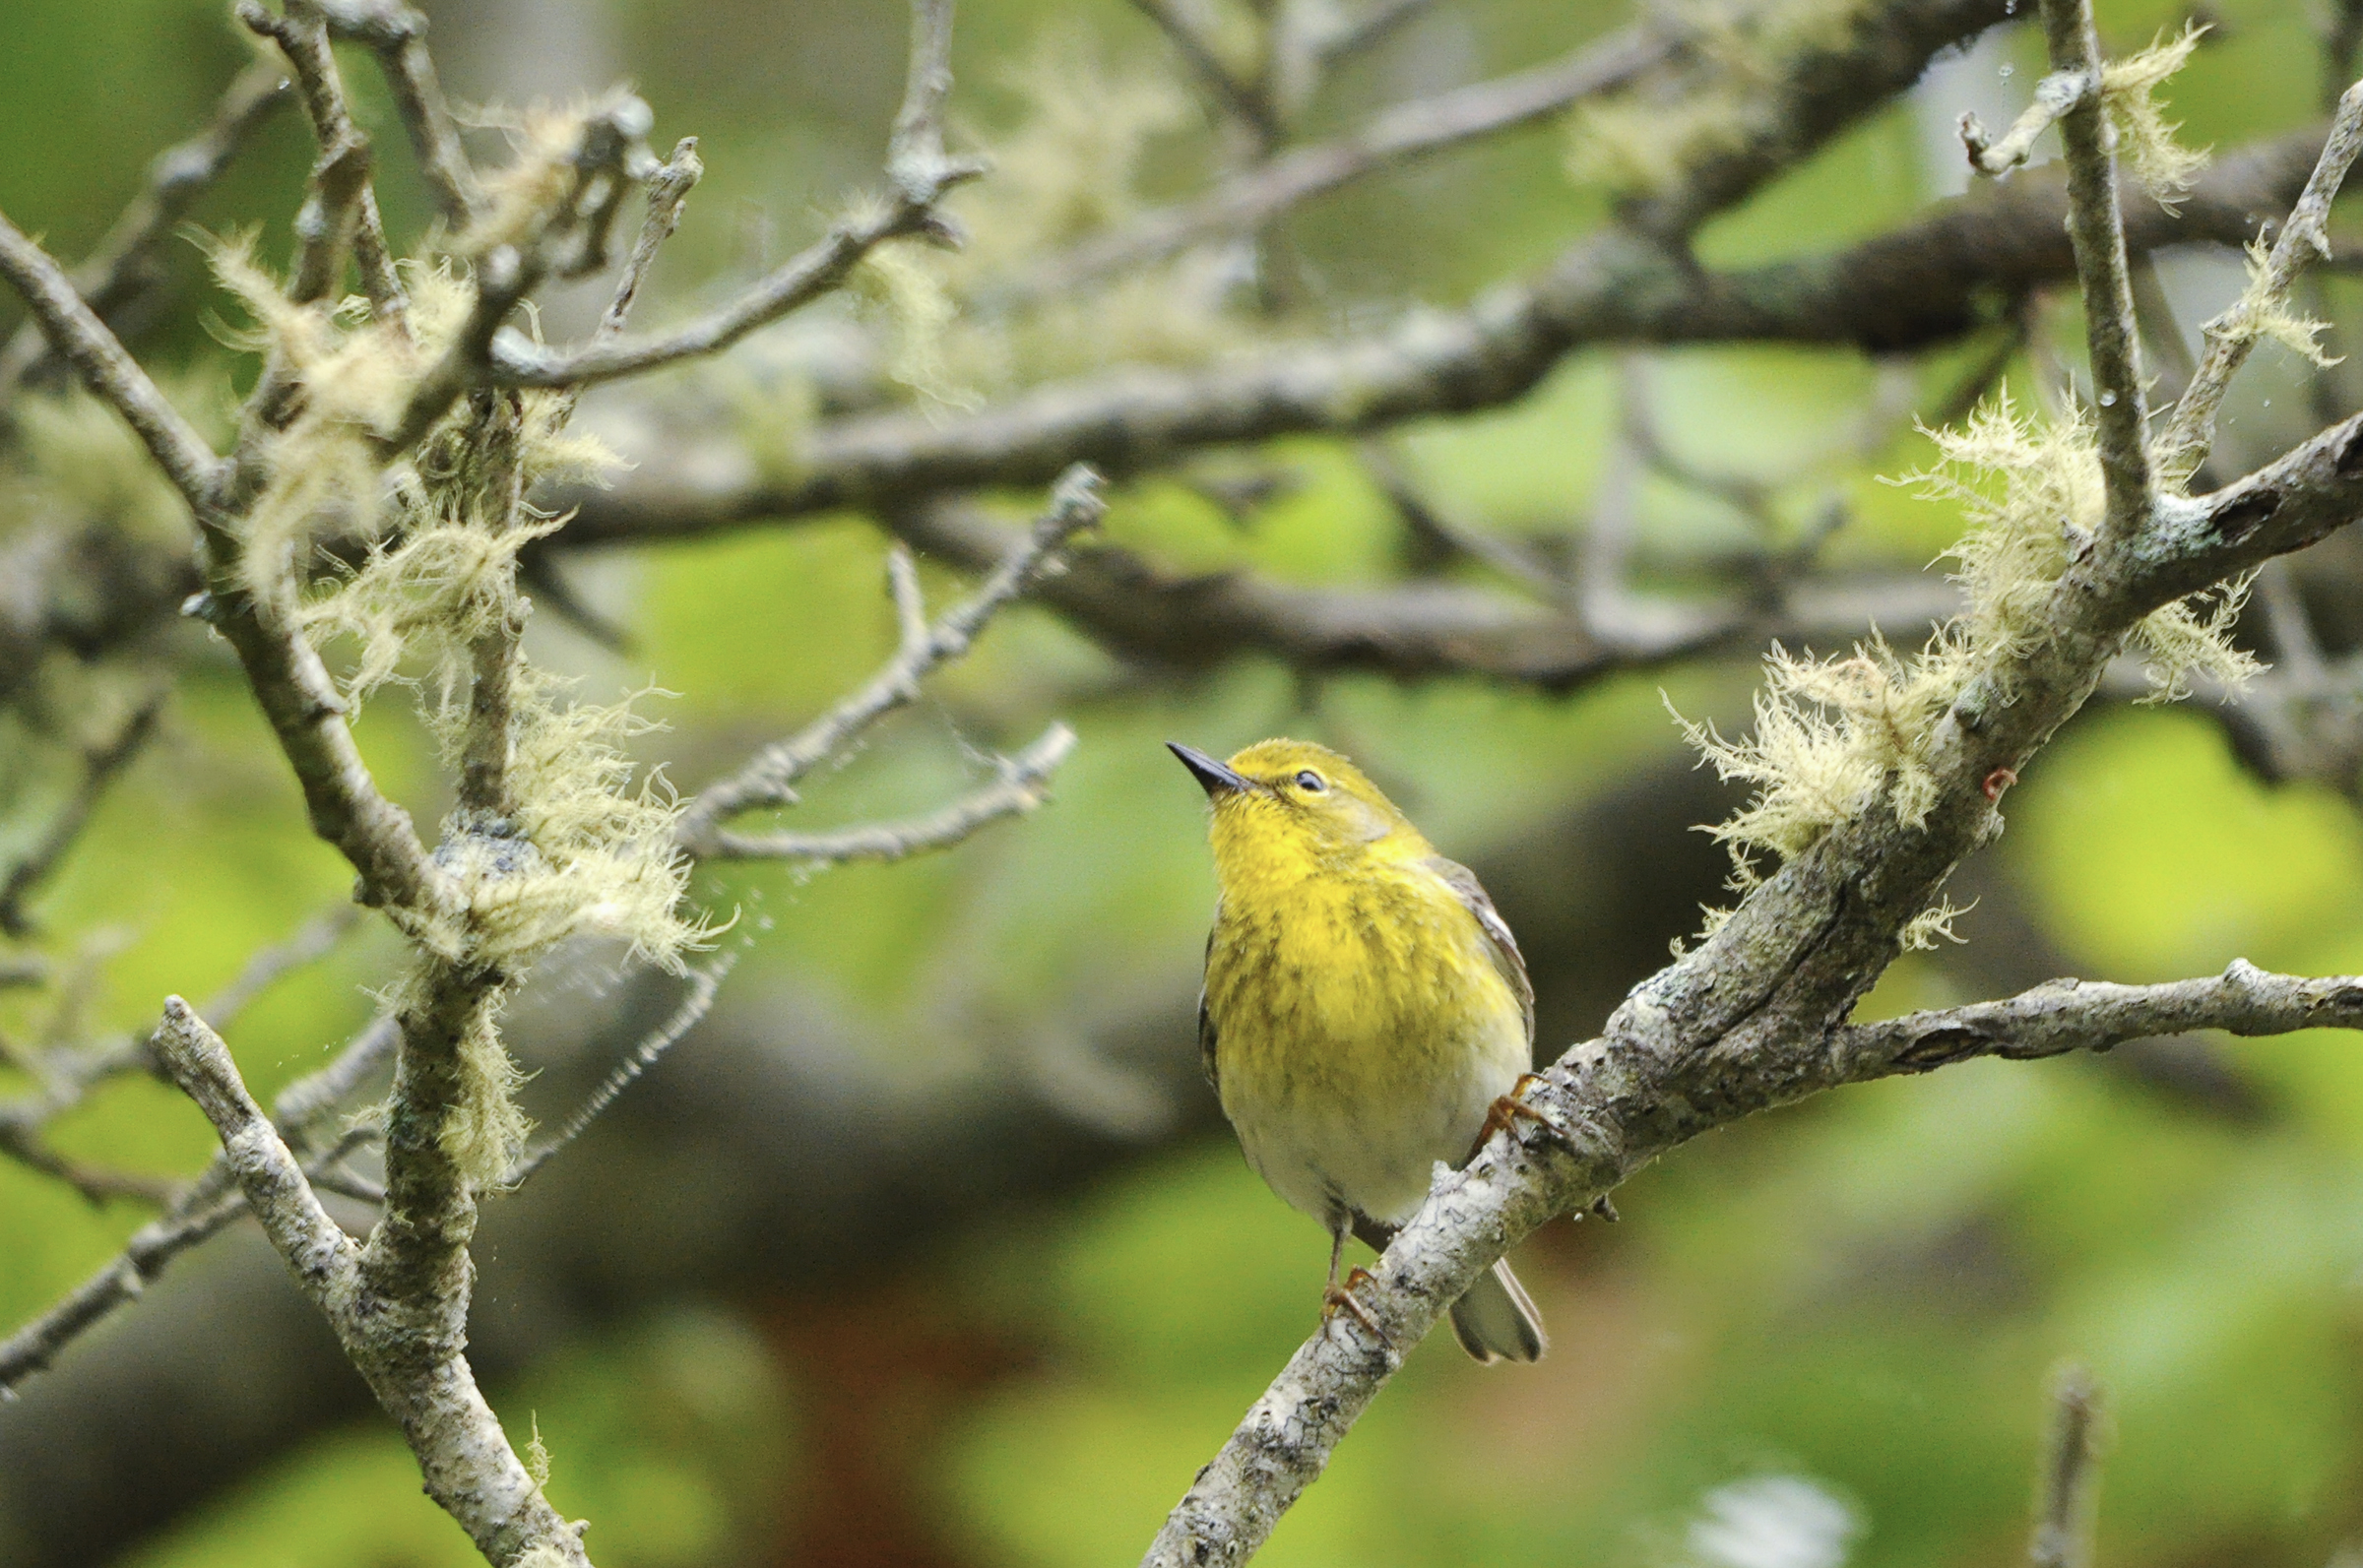 15 pine warbler white oak pitch pine forest putneypics flickr cc%28by nc%202.0%29